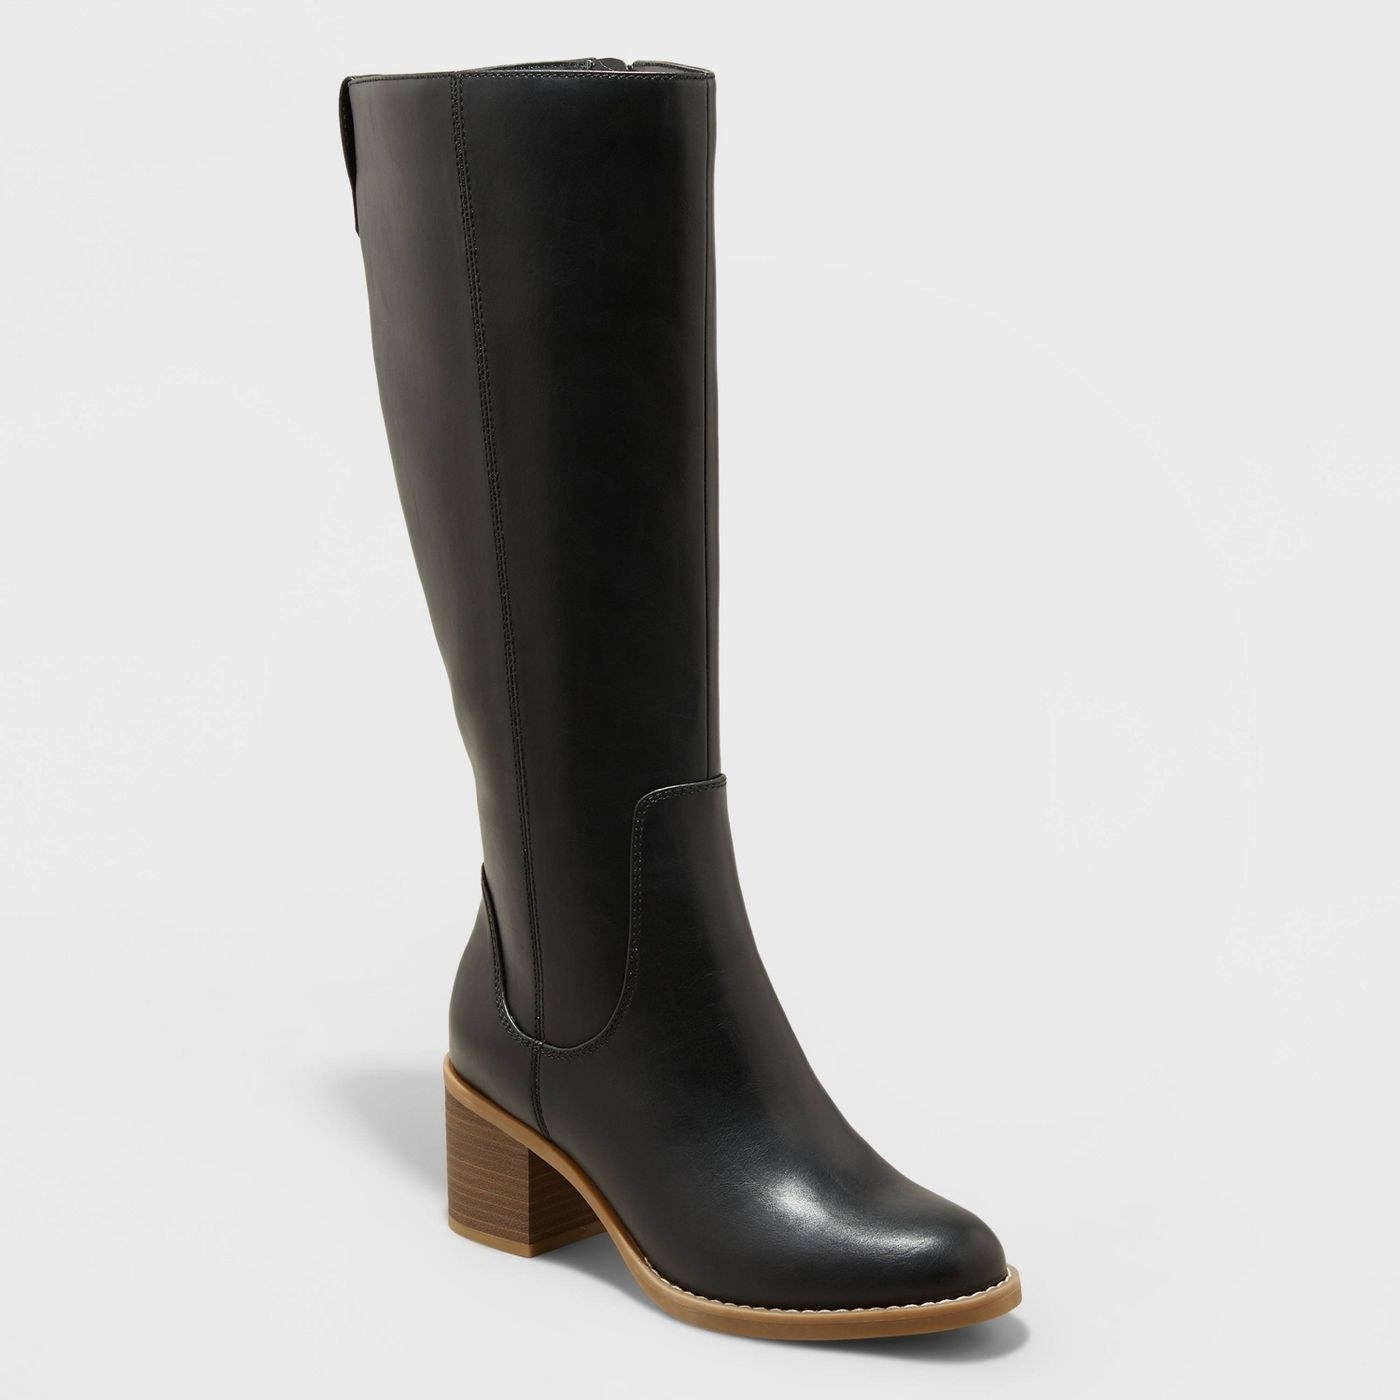 black riding boot with a block heel